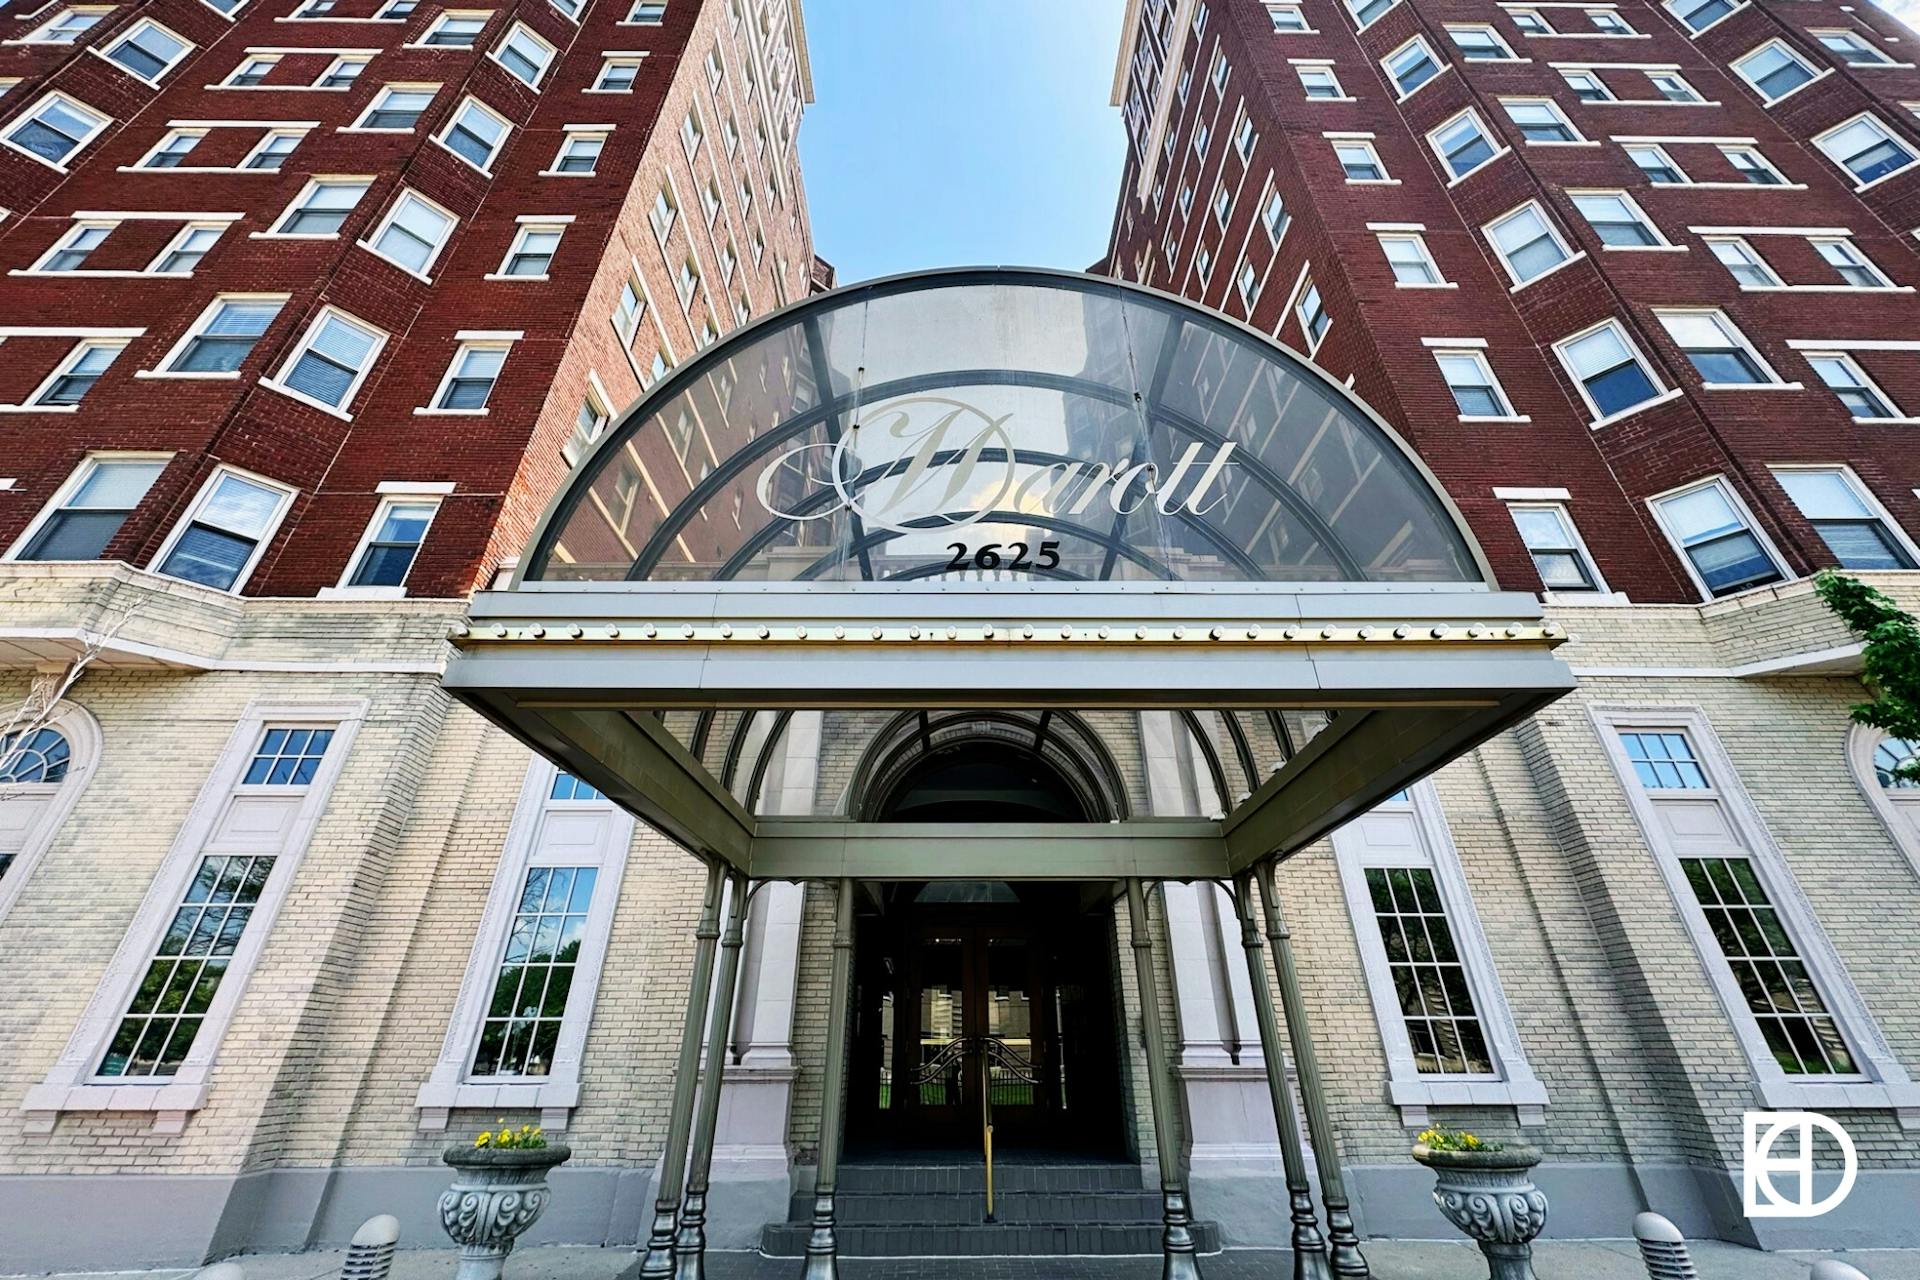 Photo of the entrance of The Marott apartment building